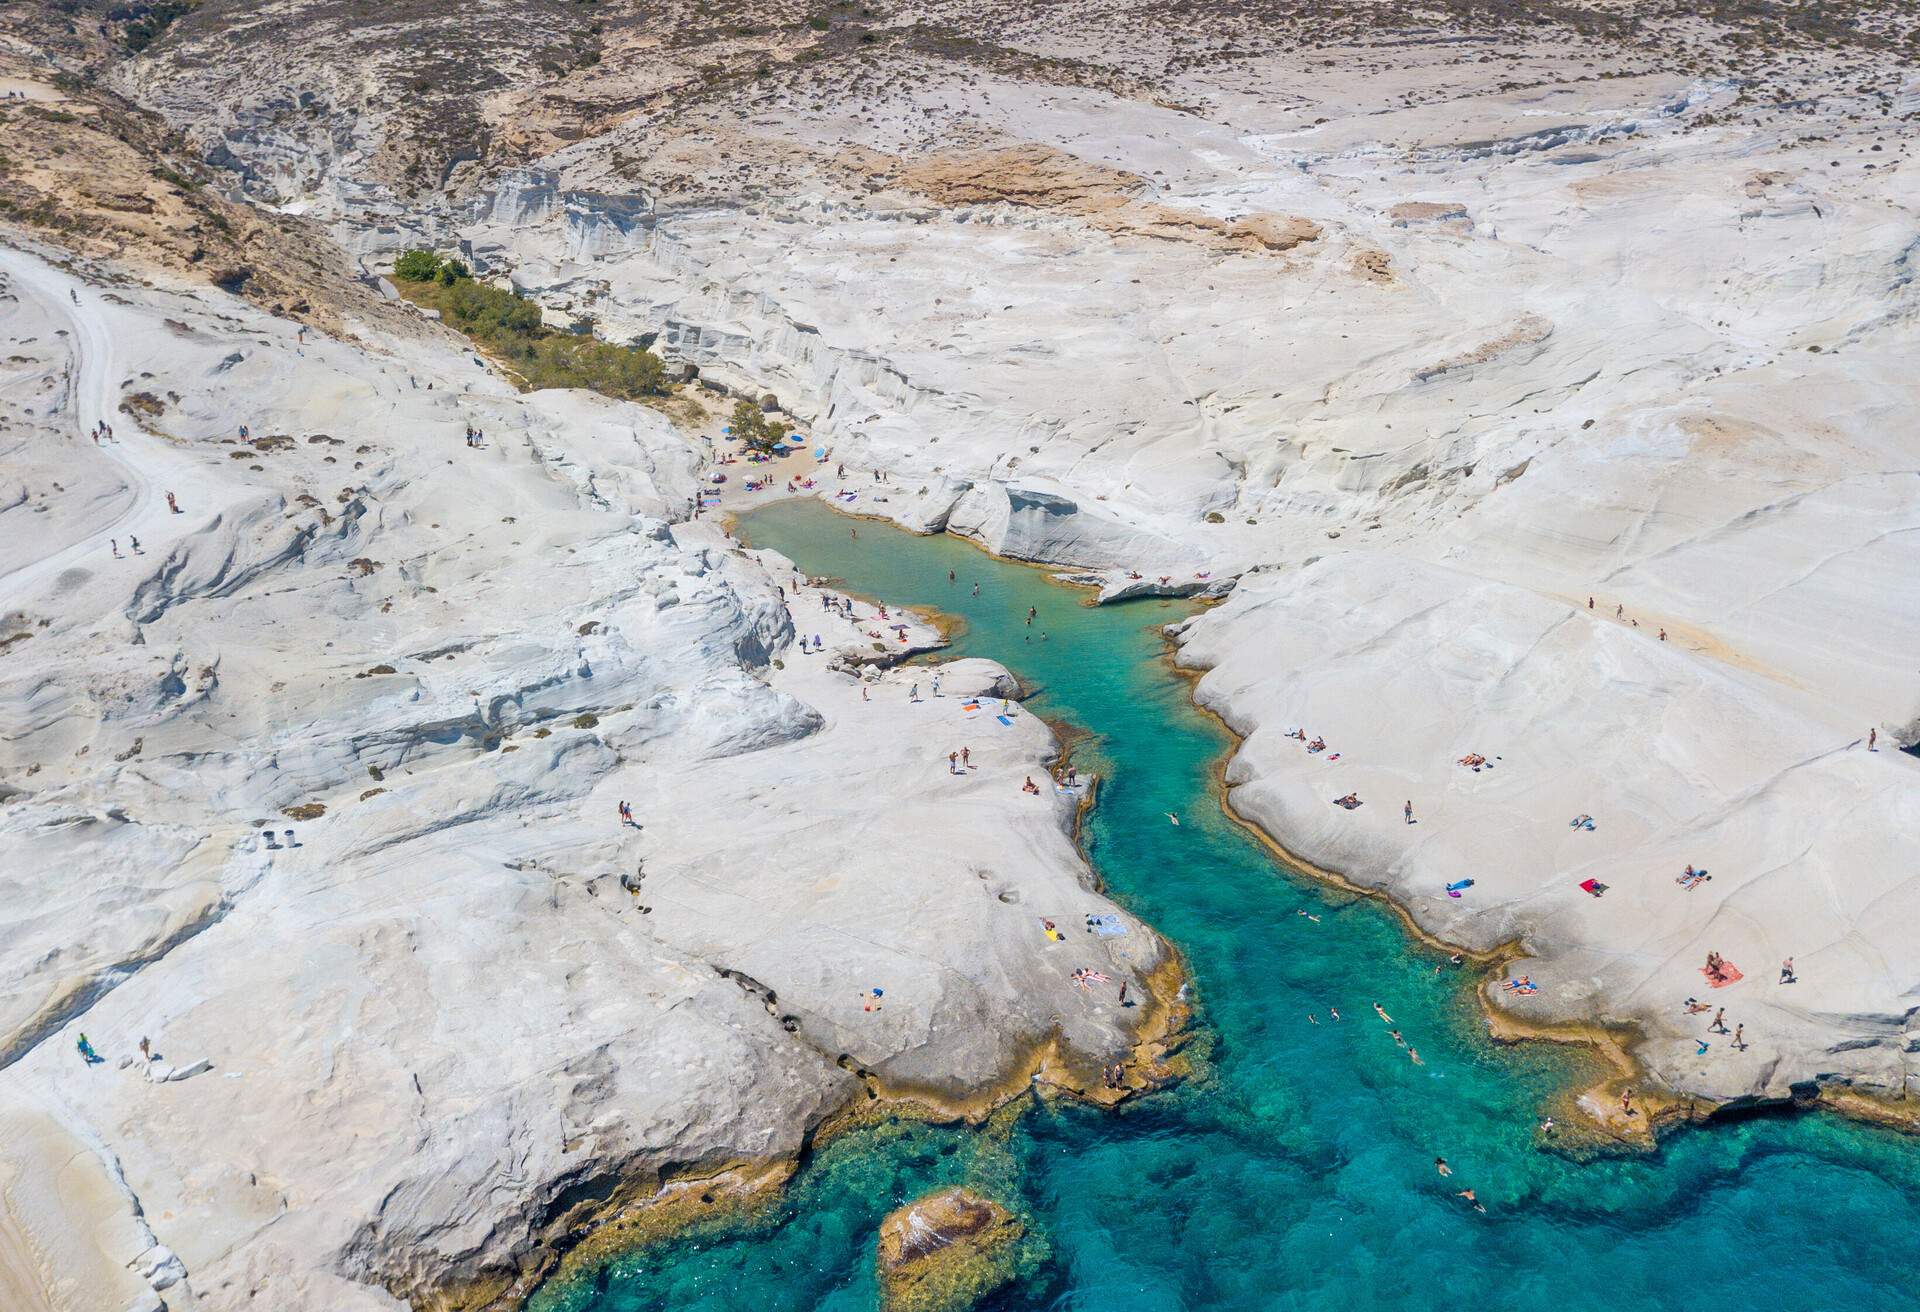 Milos island, Greece, 02 July 2018: This is an aerial picture of the famous and unique beach of Sarakiniko on Milos island. Made entirely of white rock, the landscape is unique and hundreds of visitors join every day. The beach is located on the east side of the island.